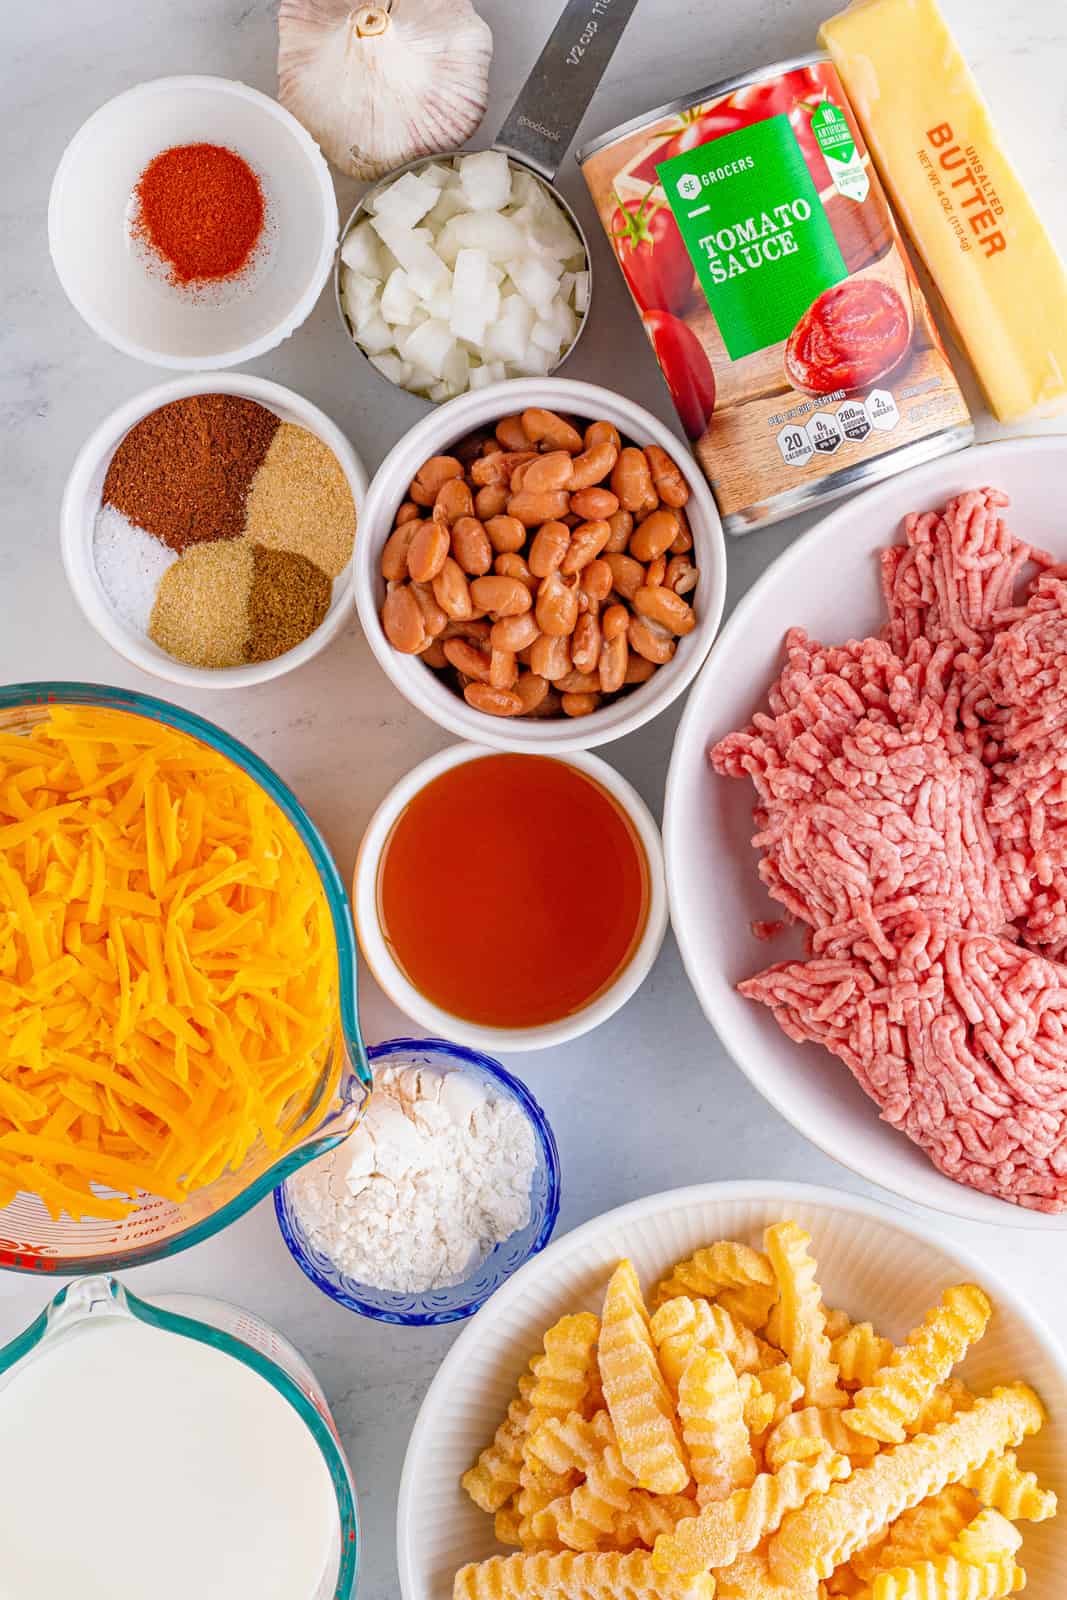 Ingredients needed to make Chili Cheese Fries.